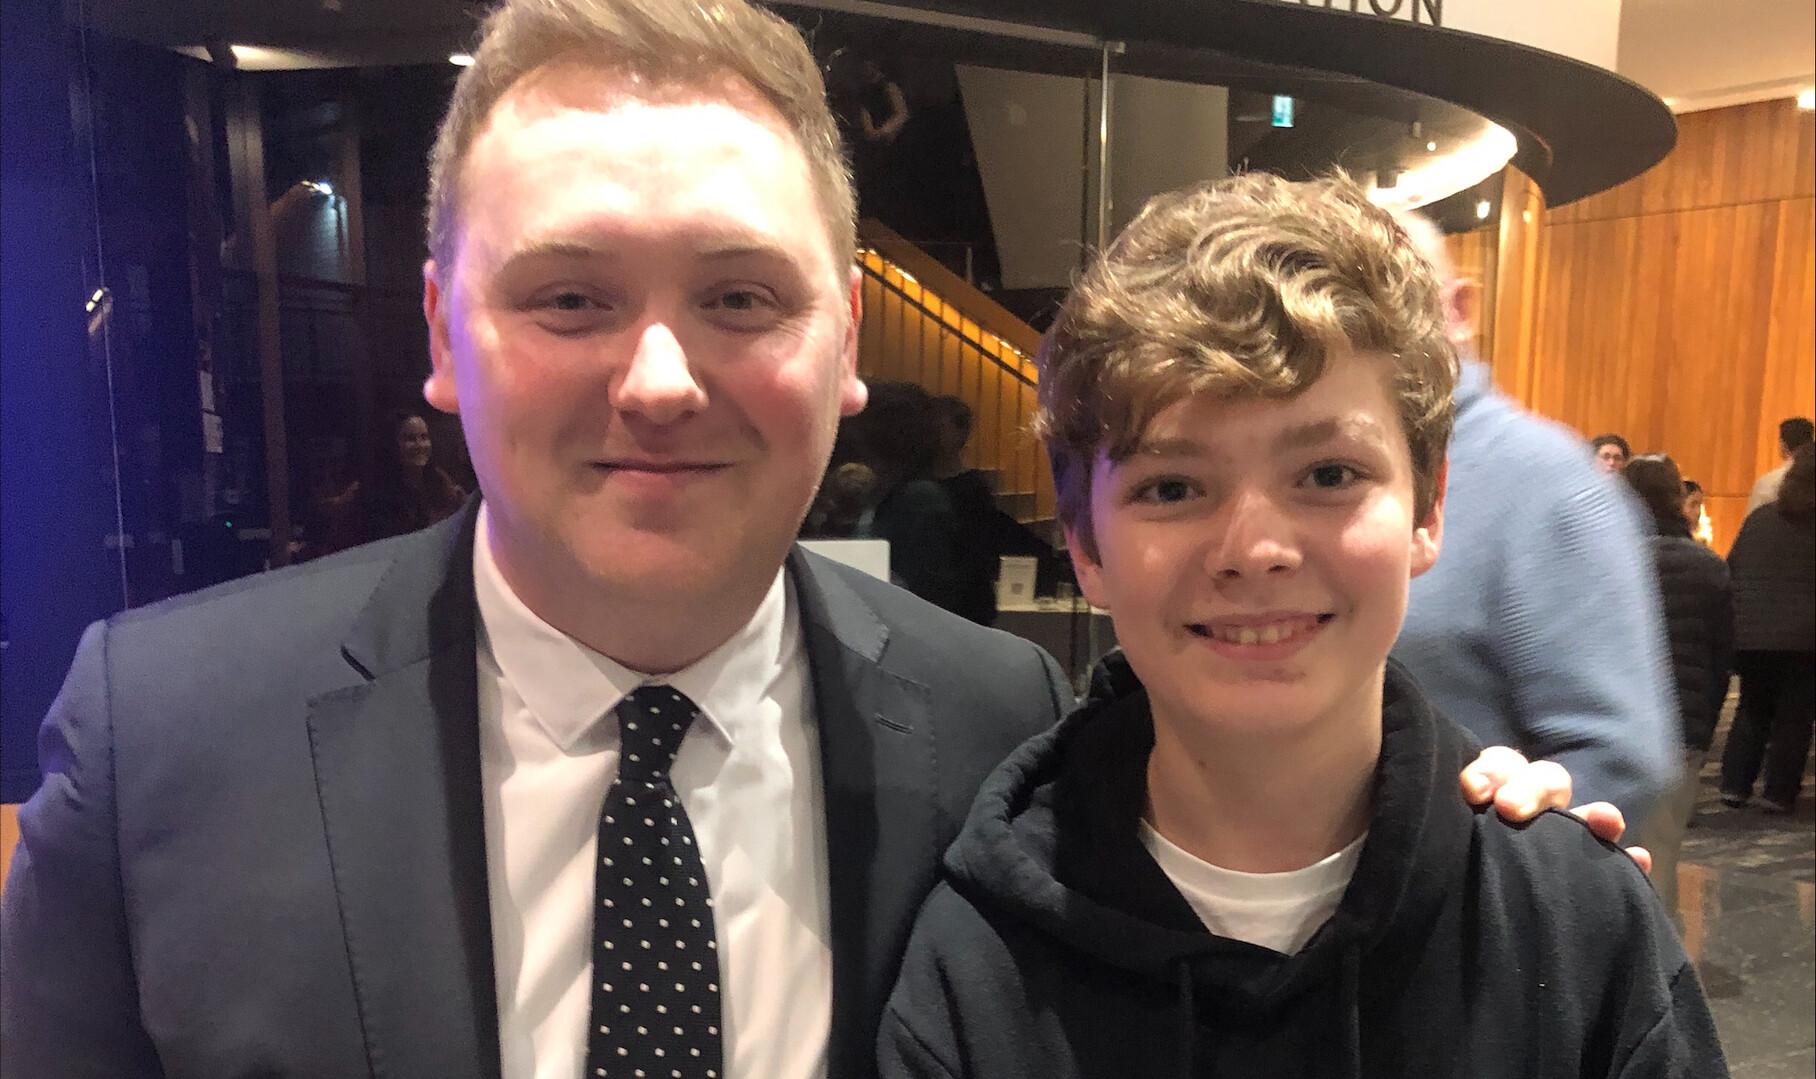 Hamish (Year 10) with Principal Trumpeter for the London Symphony Orchestra, James Fountain